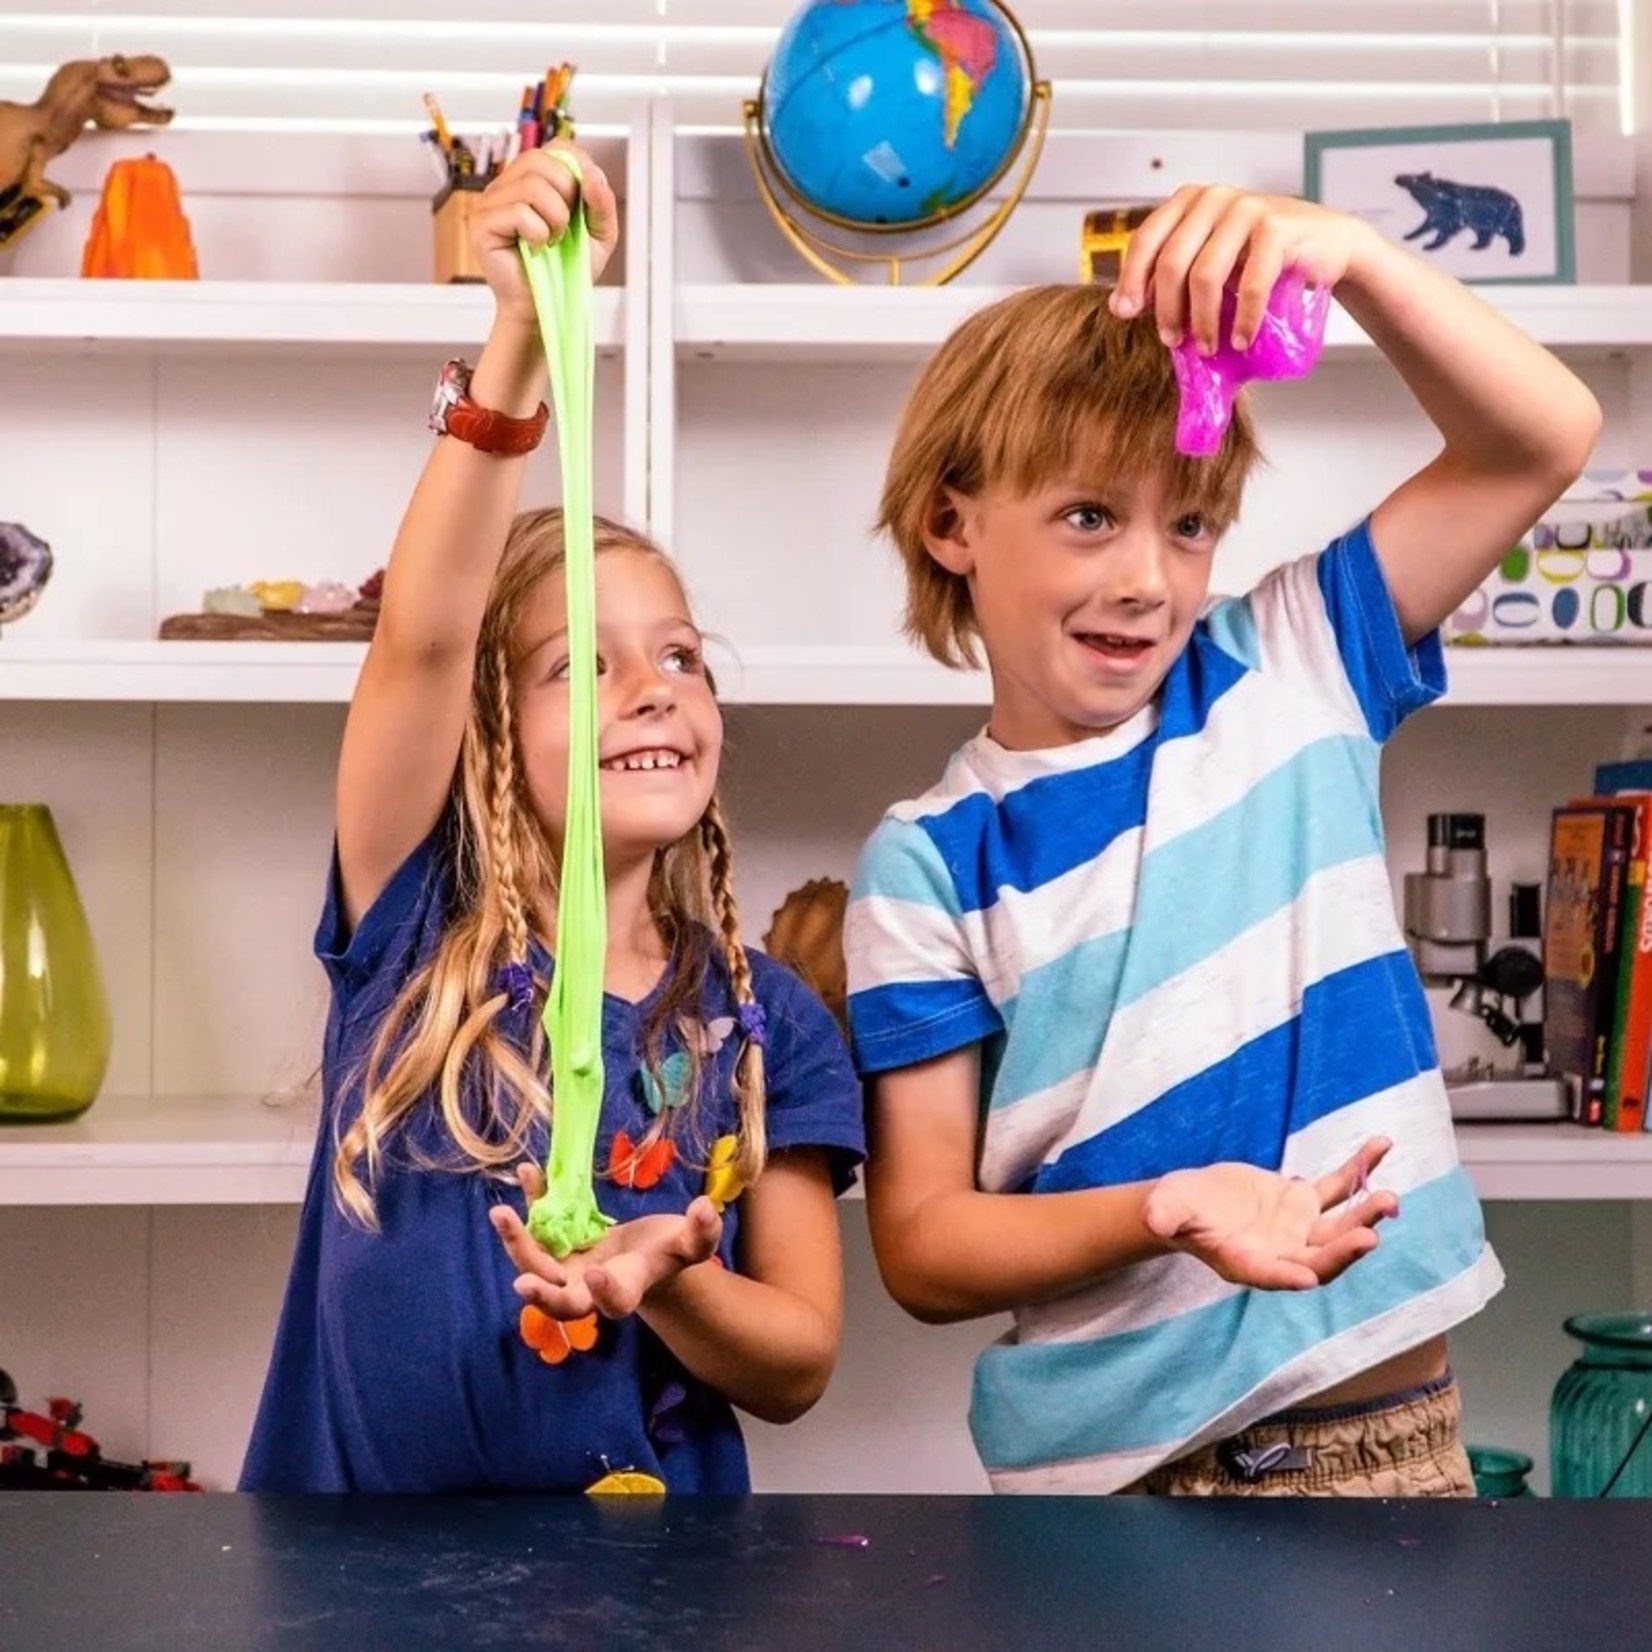 National Geographic Slime and Putty Science Lab